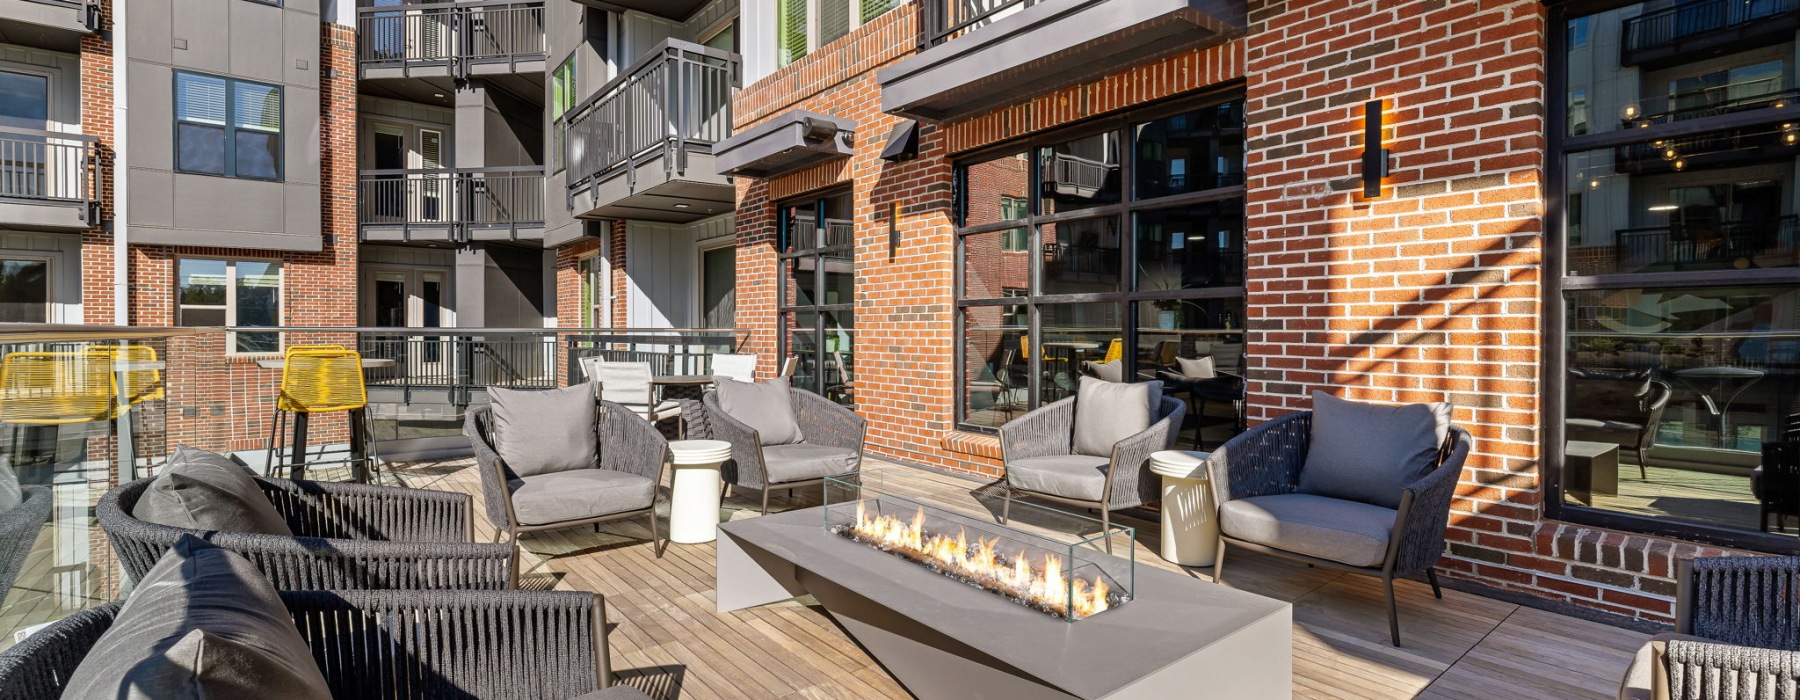 Terrace with seating and firepit off the main clubhouse